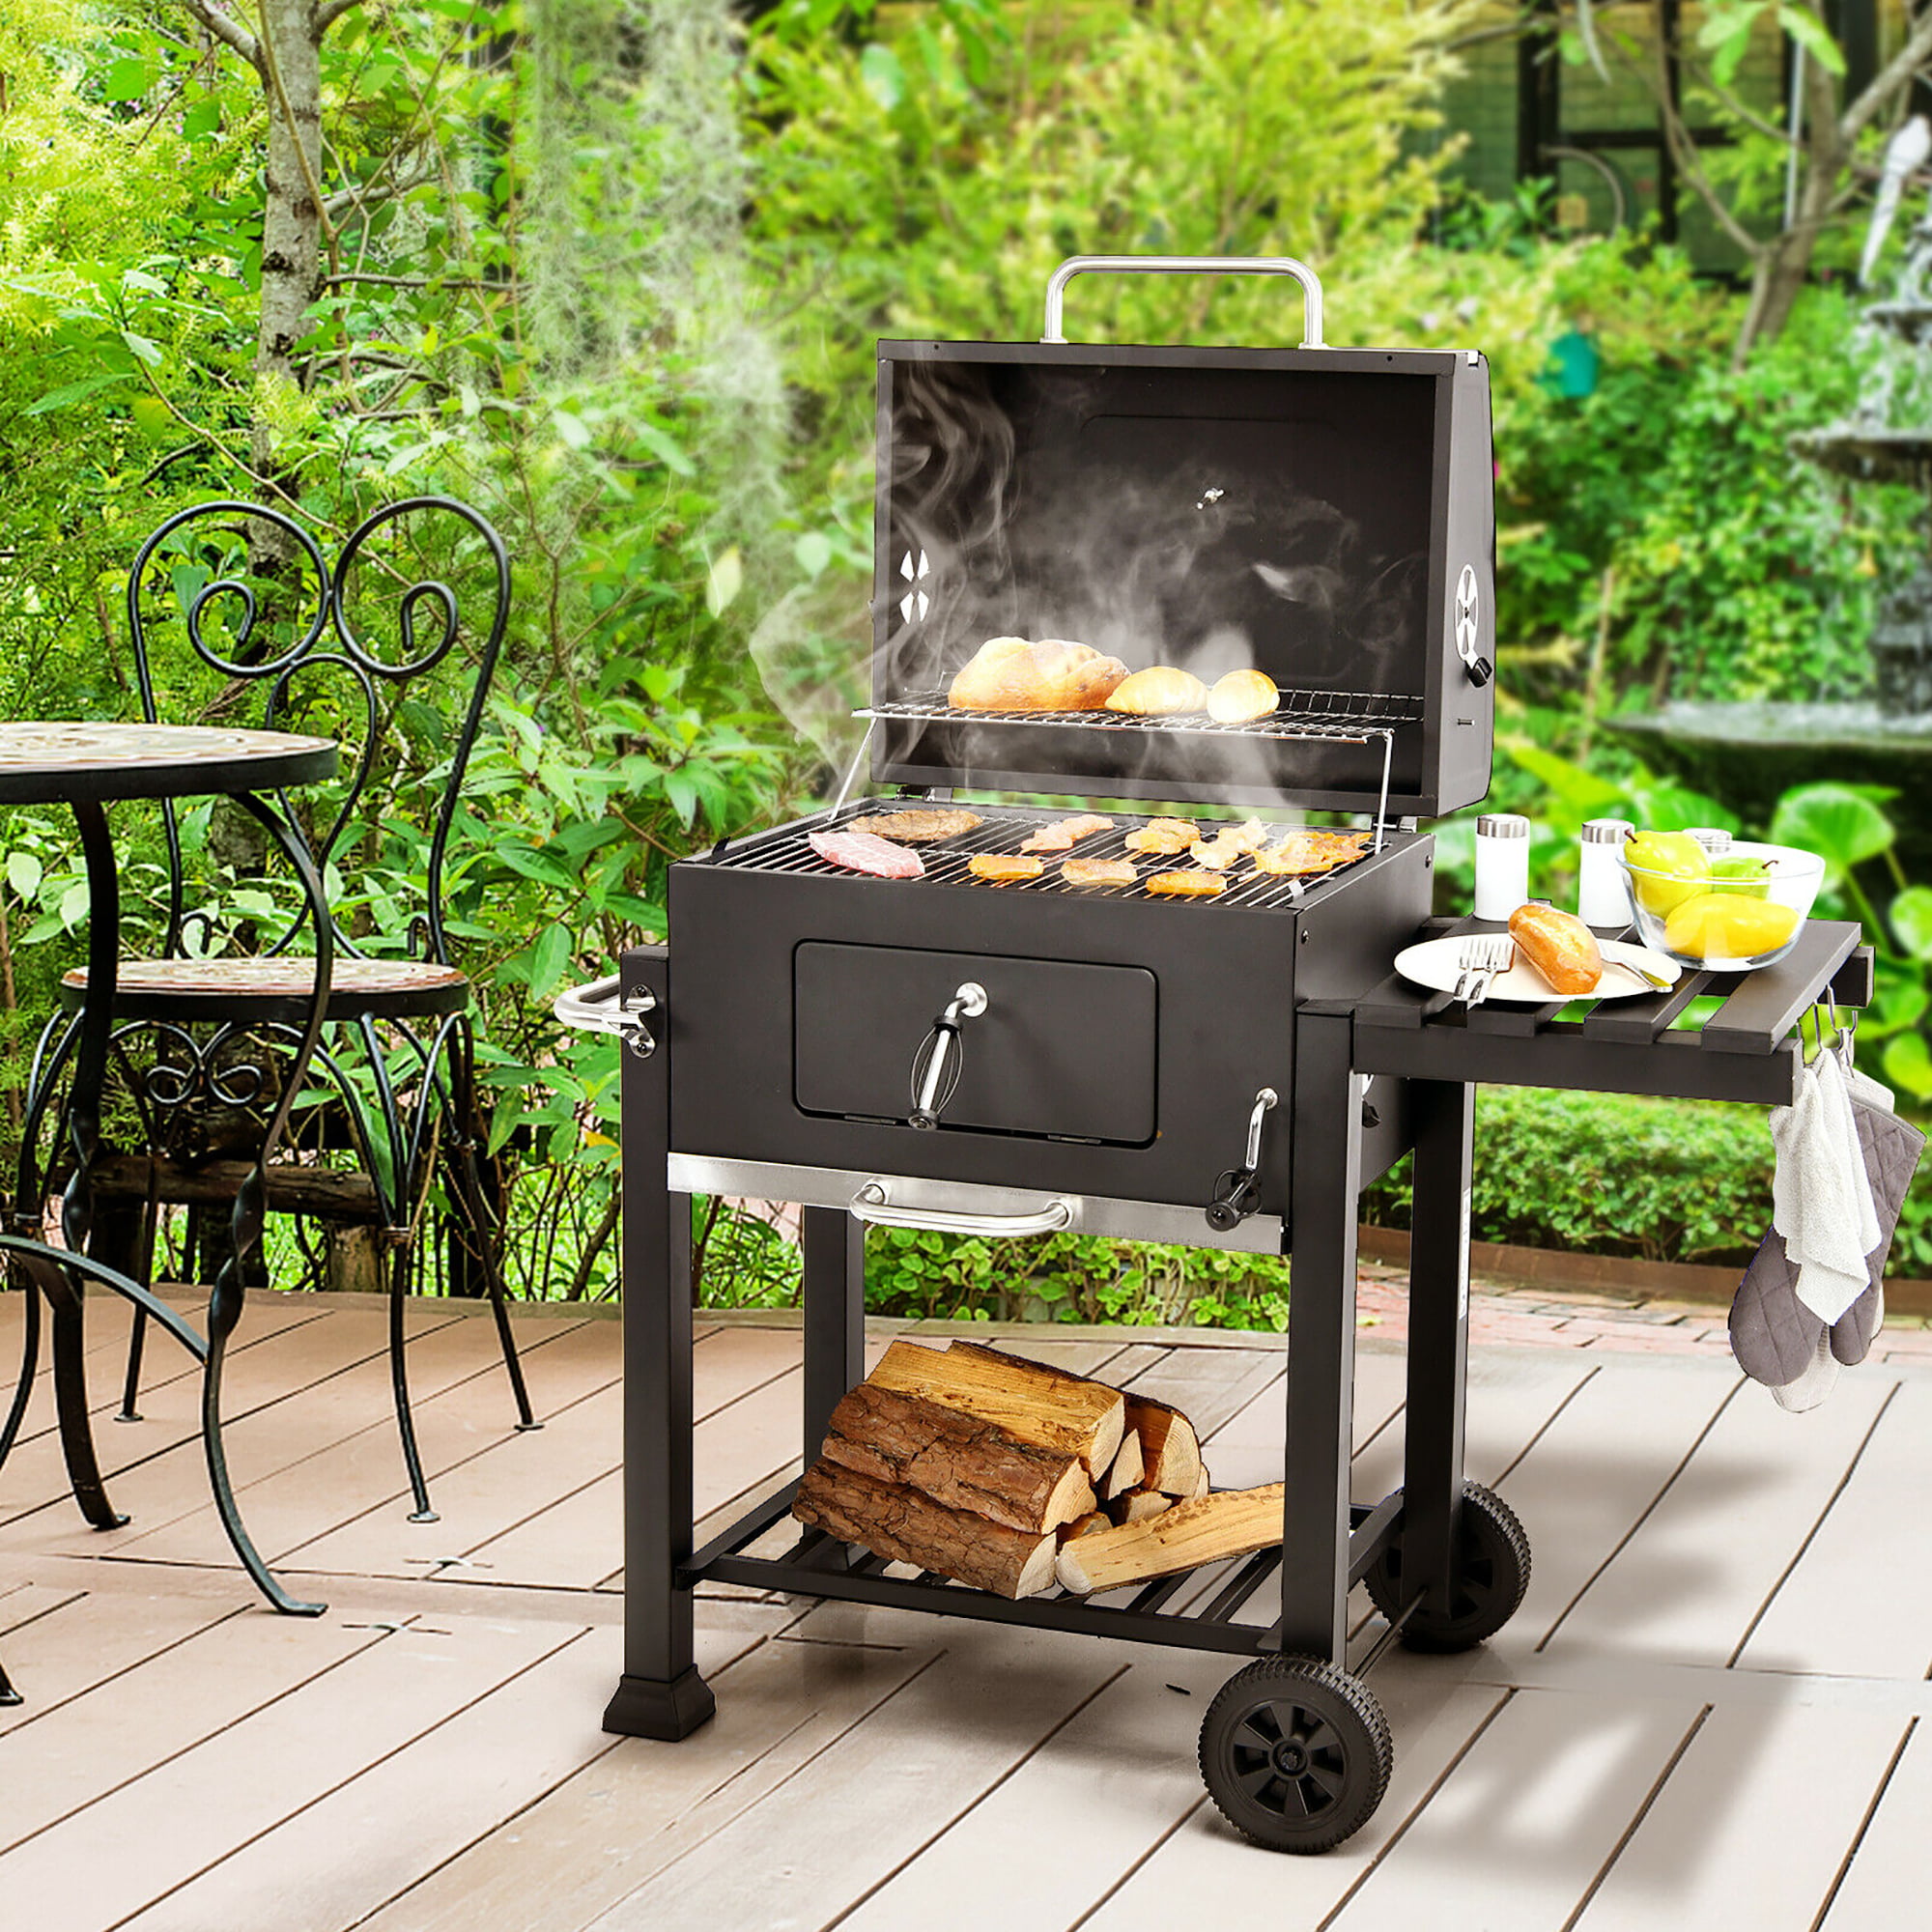 https://themarketdepot.com/wp-content/uploads/2023/01/Costway-Charcoal-Grill-Outdoor-BBQ-Smoker-with-Side-Table-Patio-Picnic-Backyard-Cooking-1.jpeg